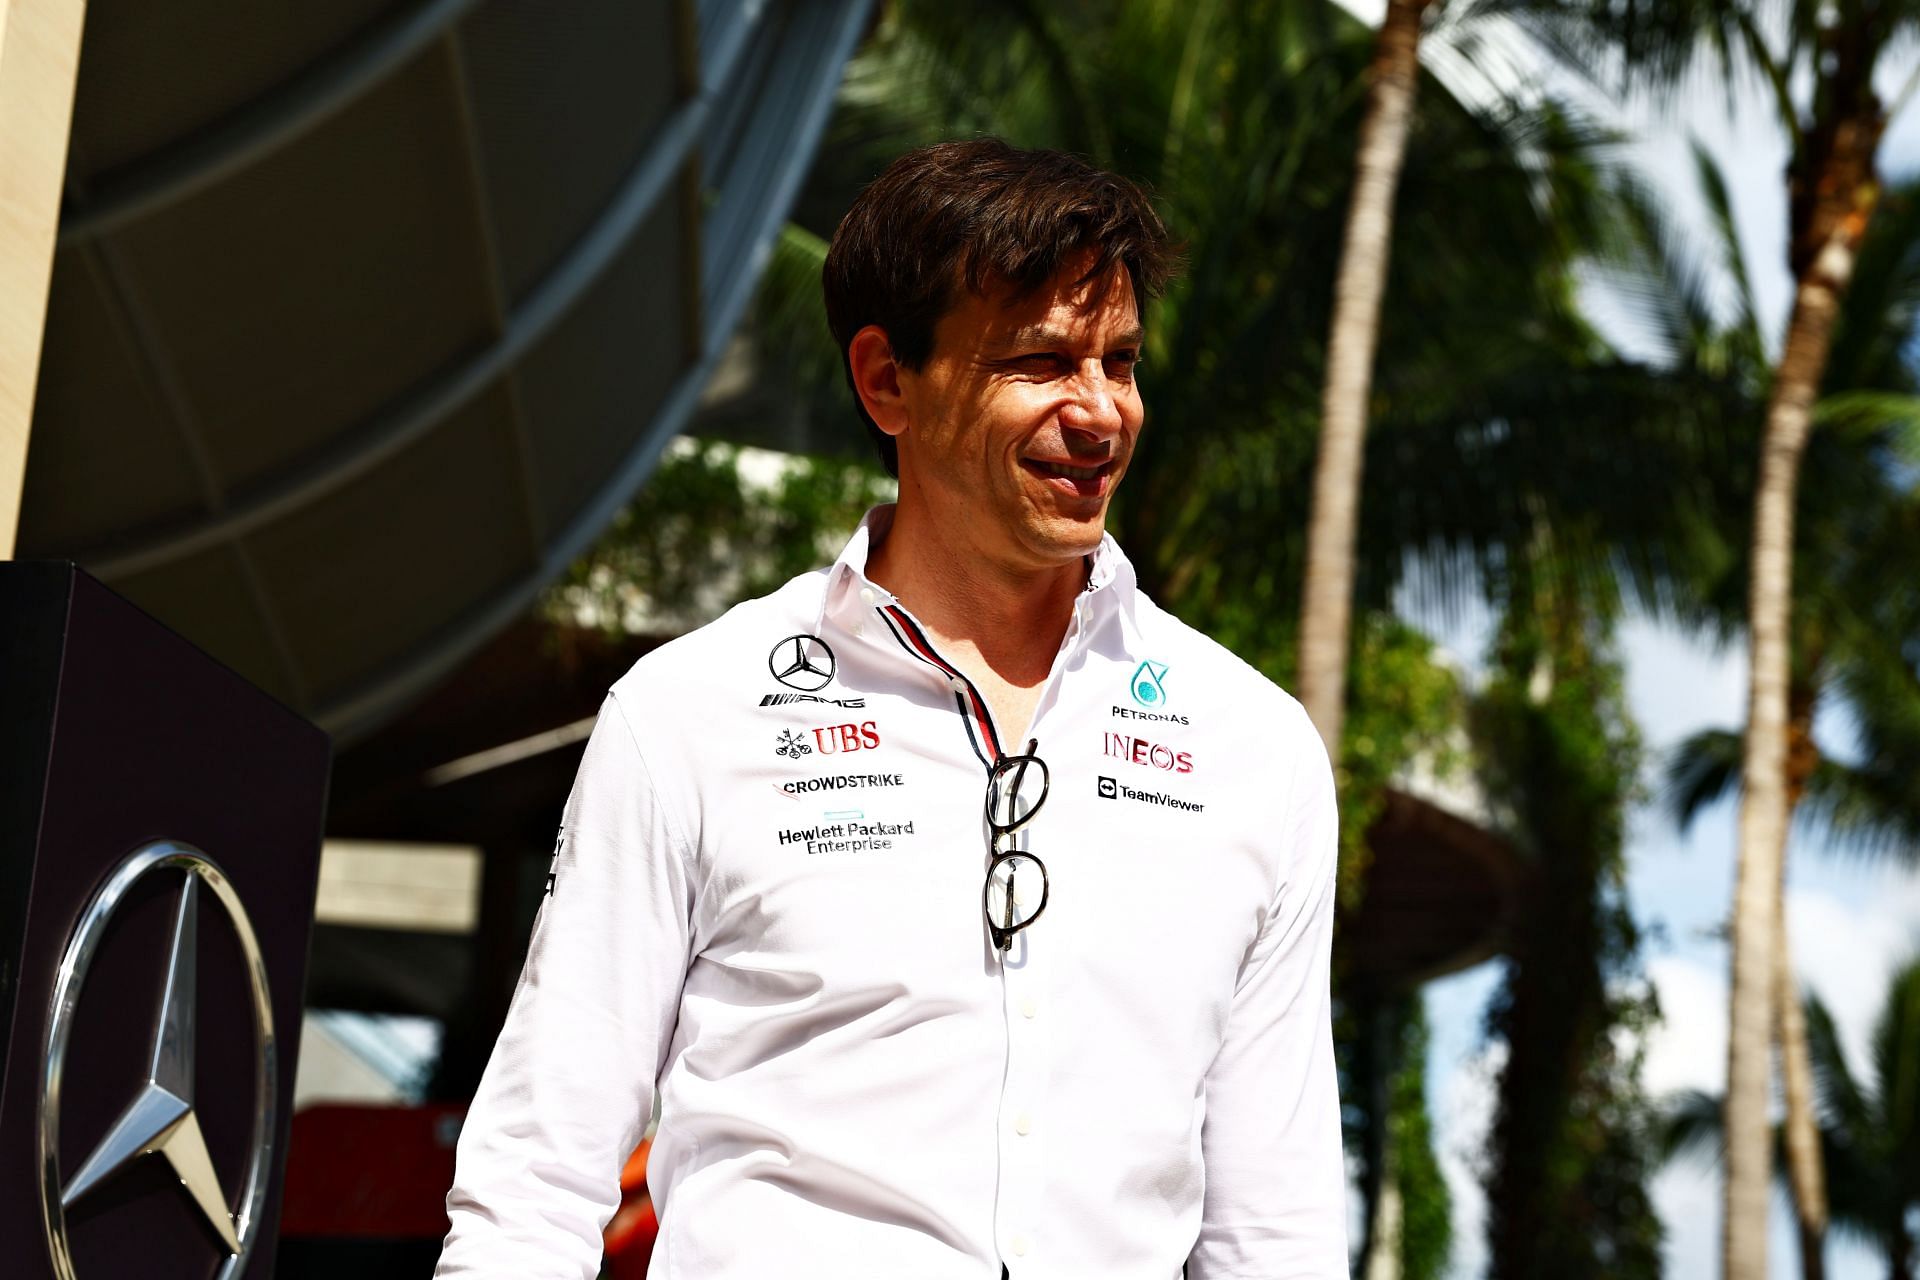 Mercedes GP Executive Director Toto Wolff walks in the Paddock prior to final practice ahead of the F1 Grand Prix of Miami at the Miami International Autodrome on May 07, 2022 (Photo by Mark Thompson/Getty Images)